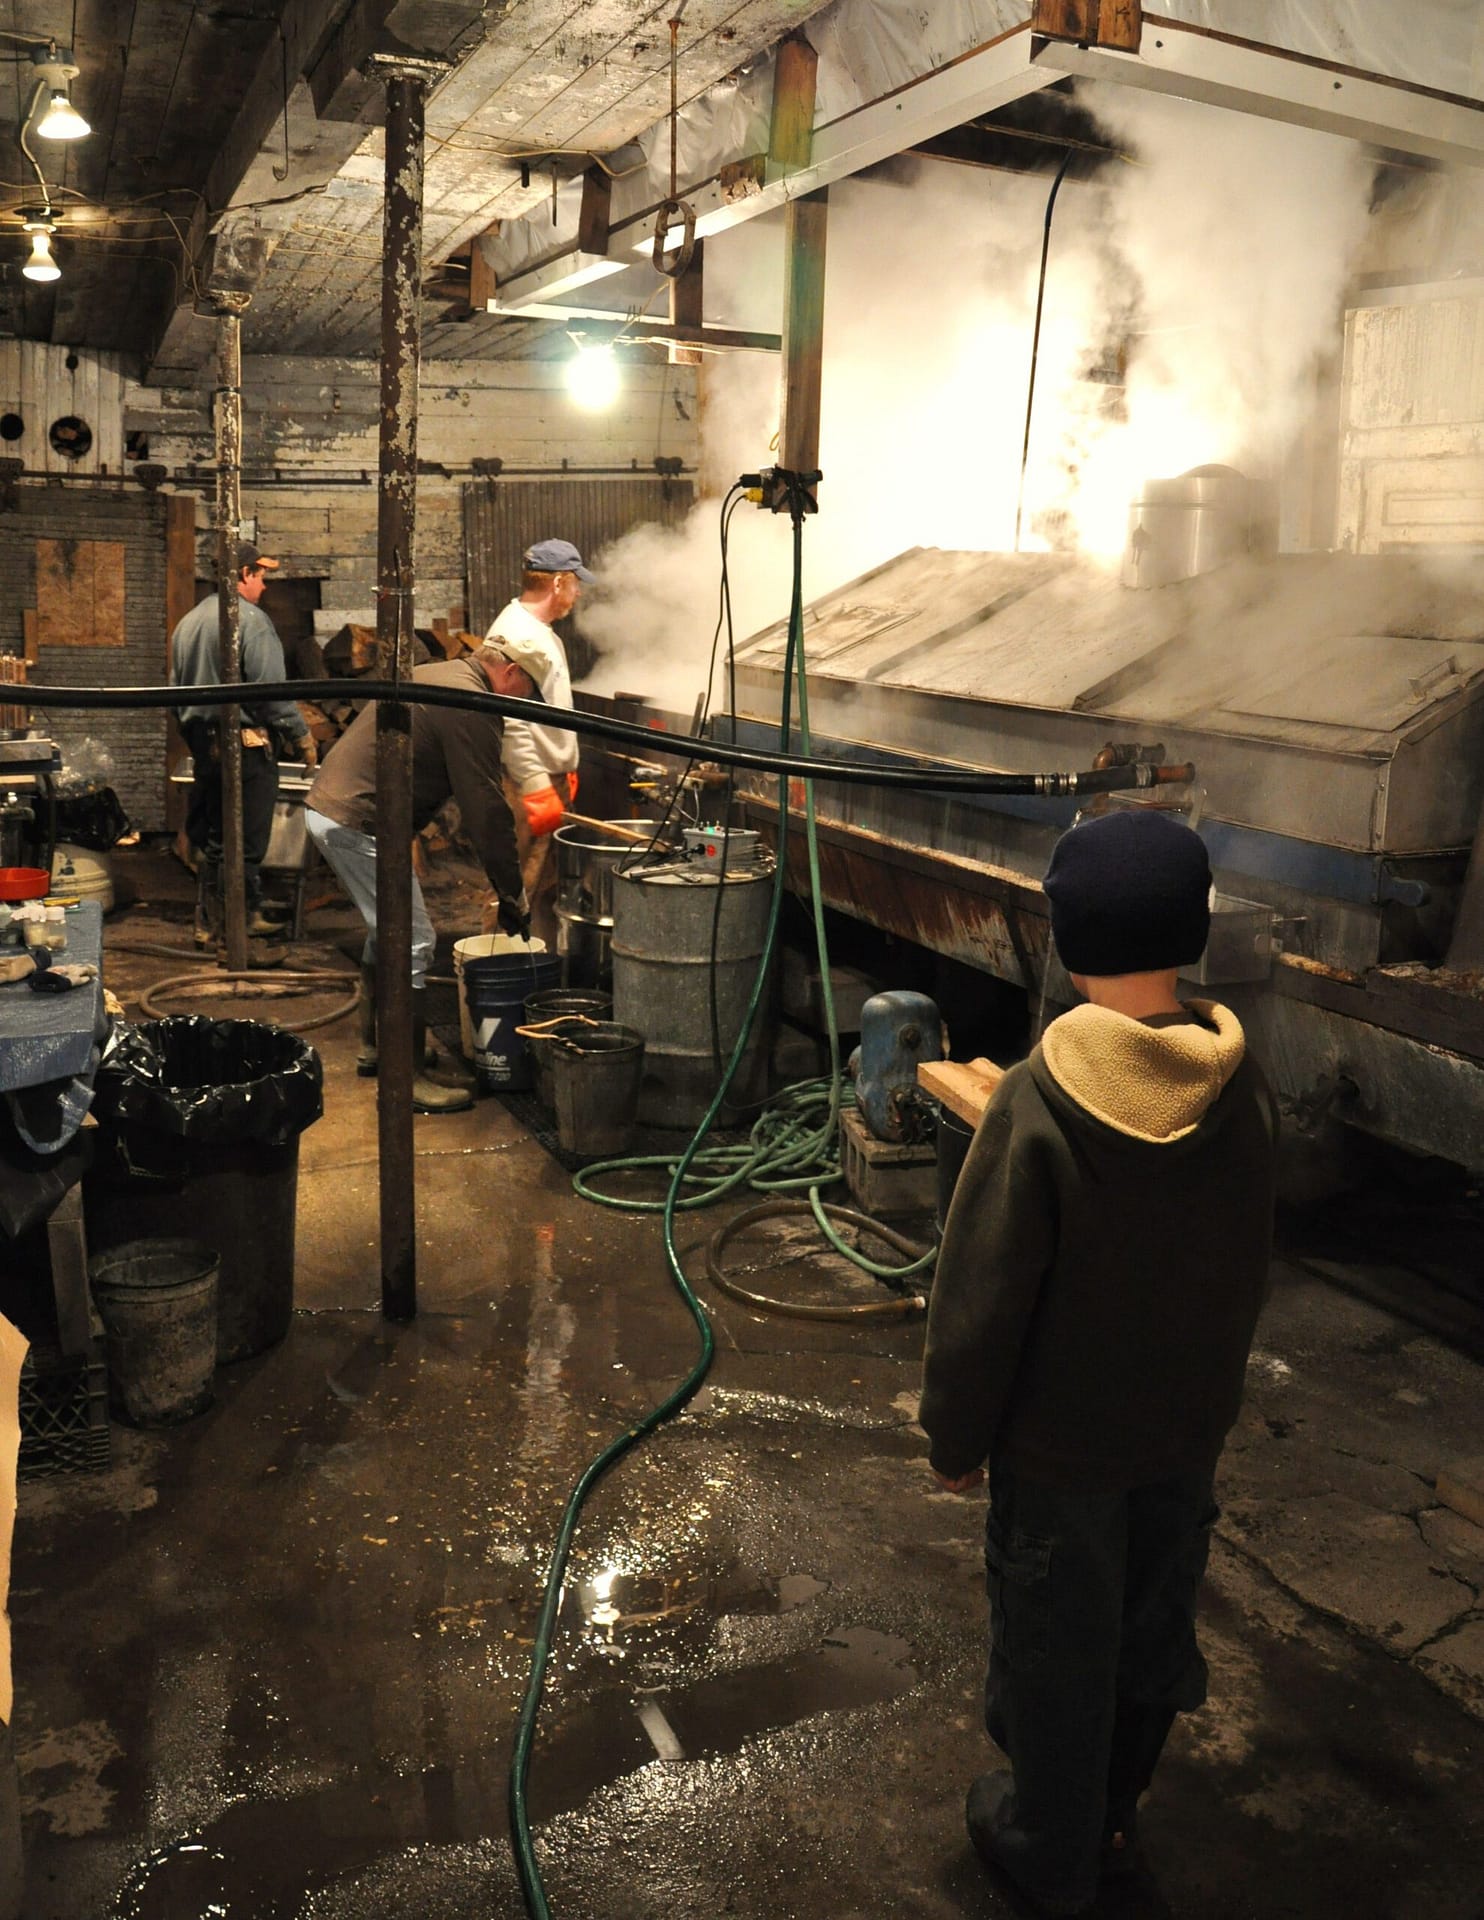 Image: Child looking on as people work around the evaporator rig at the sugar house